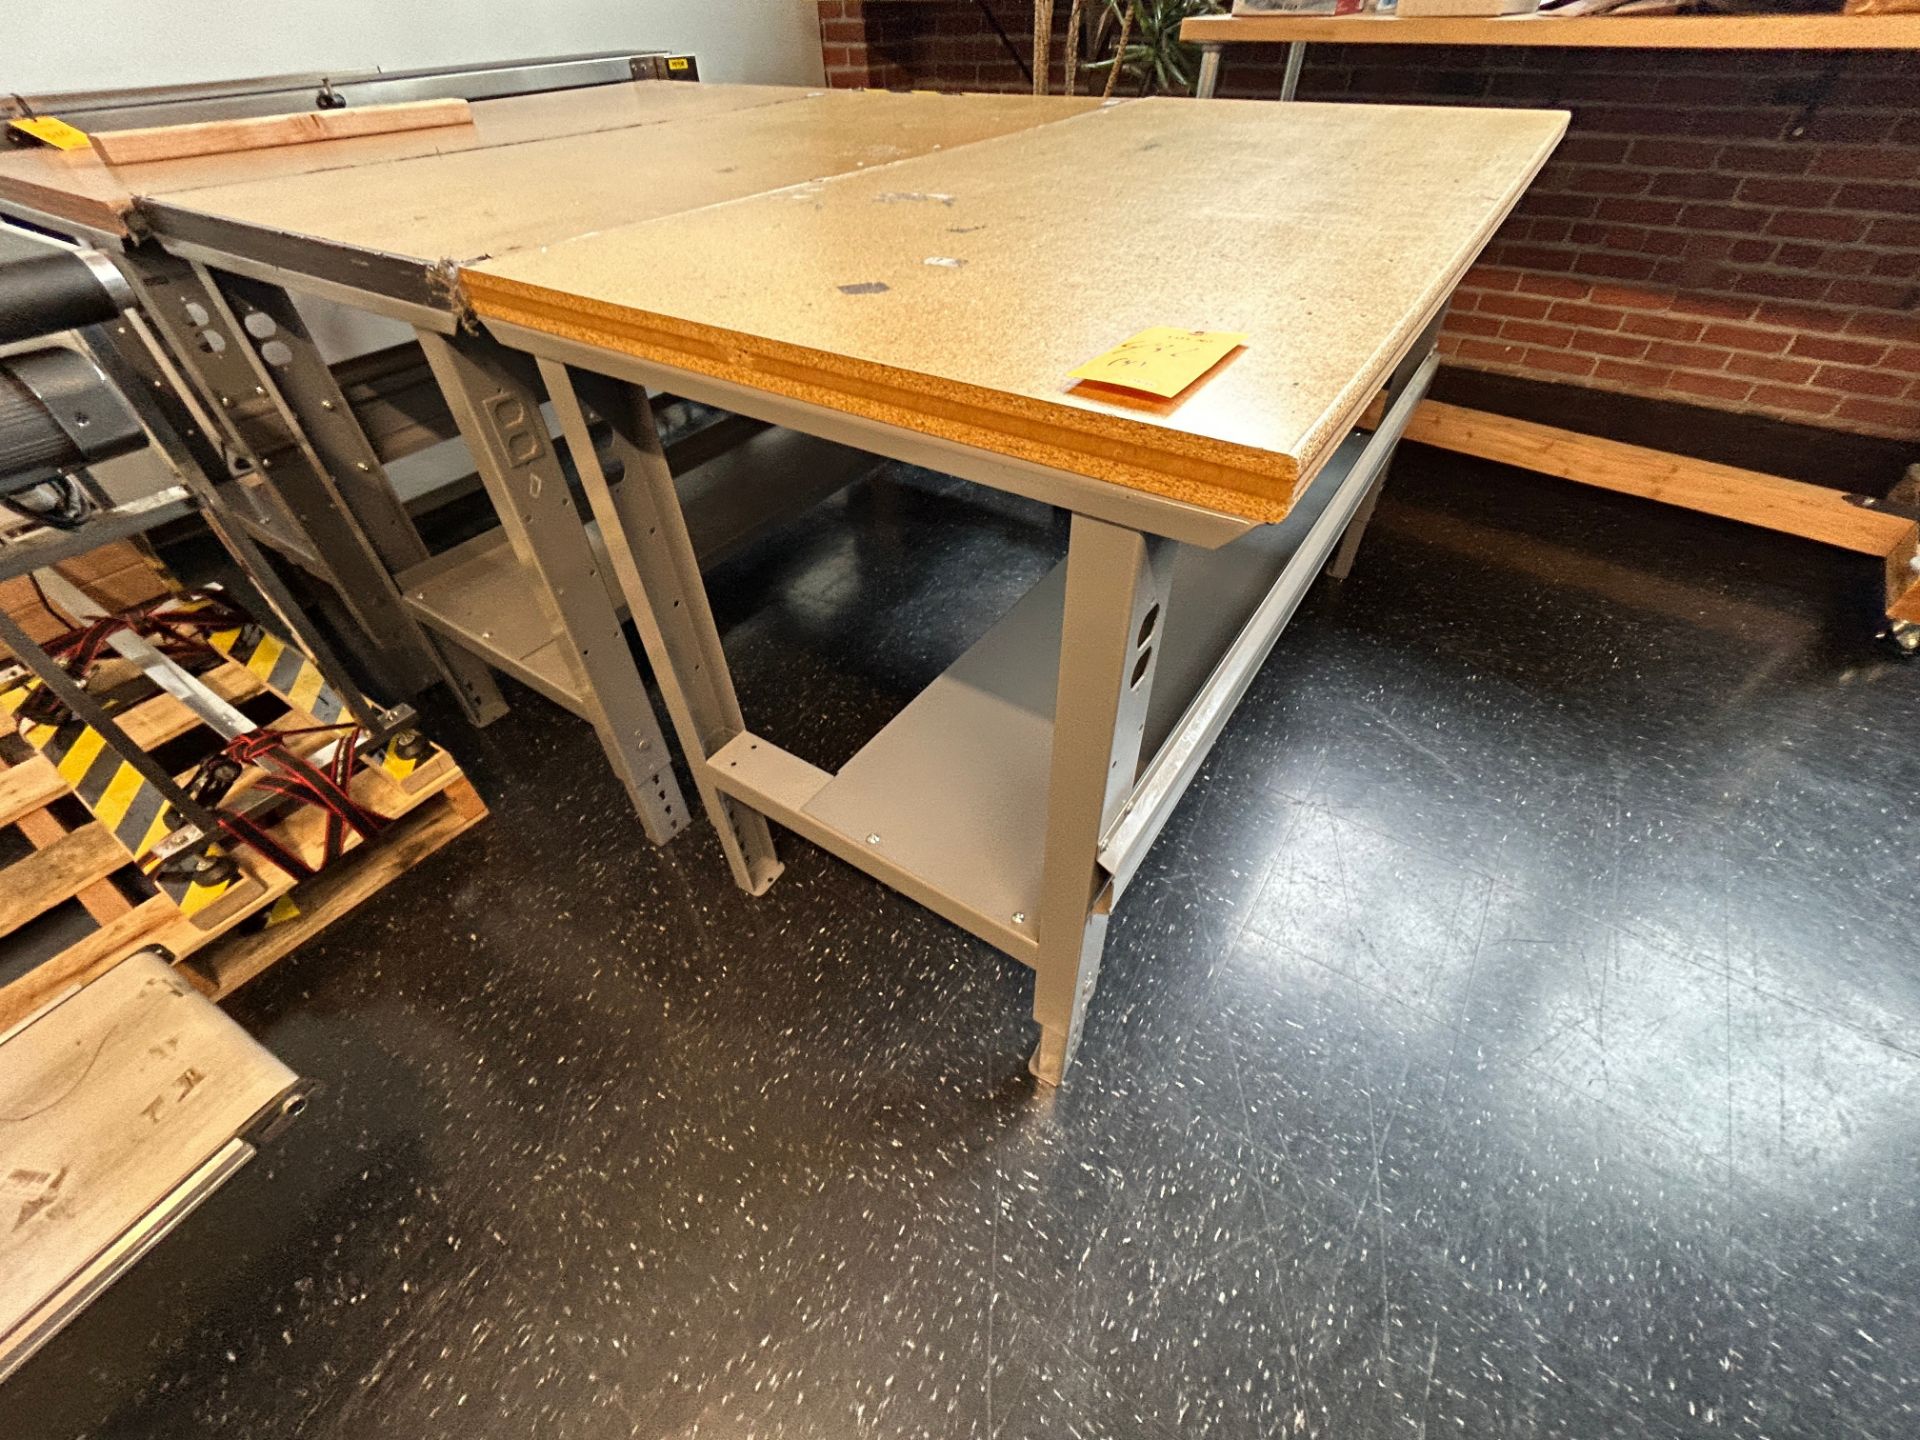 Lot (4) - Steel-Based Tables, with Wood tops 5.5 ft. x 3 Ft., (1) on Casters - Image 2 of 6